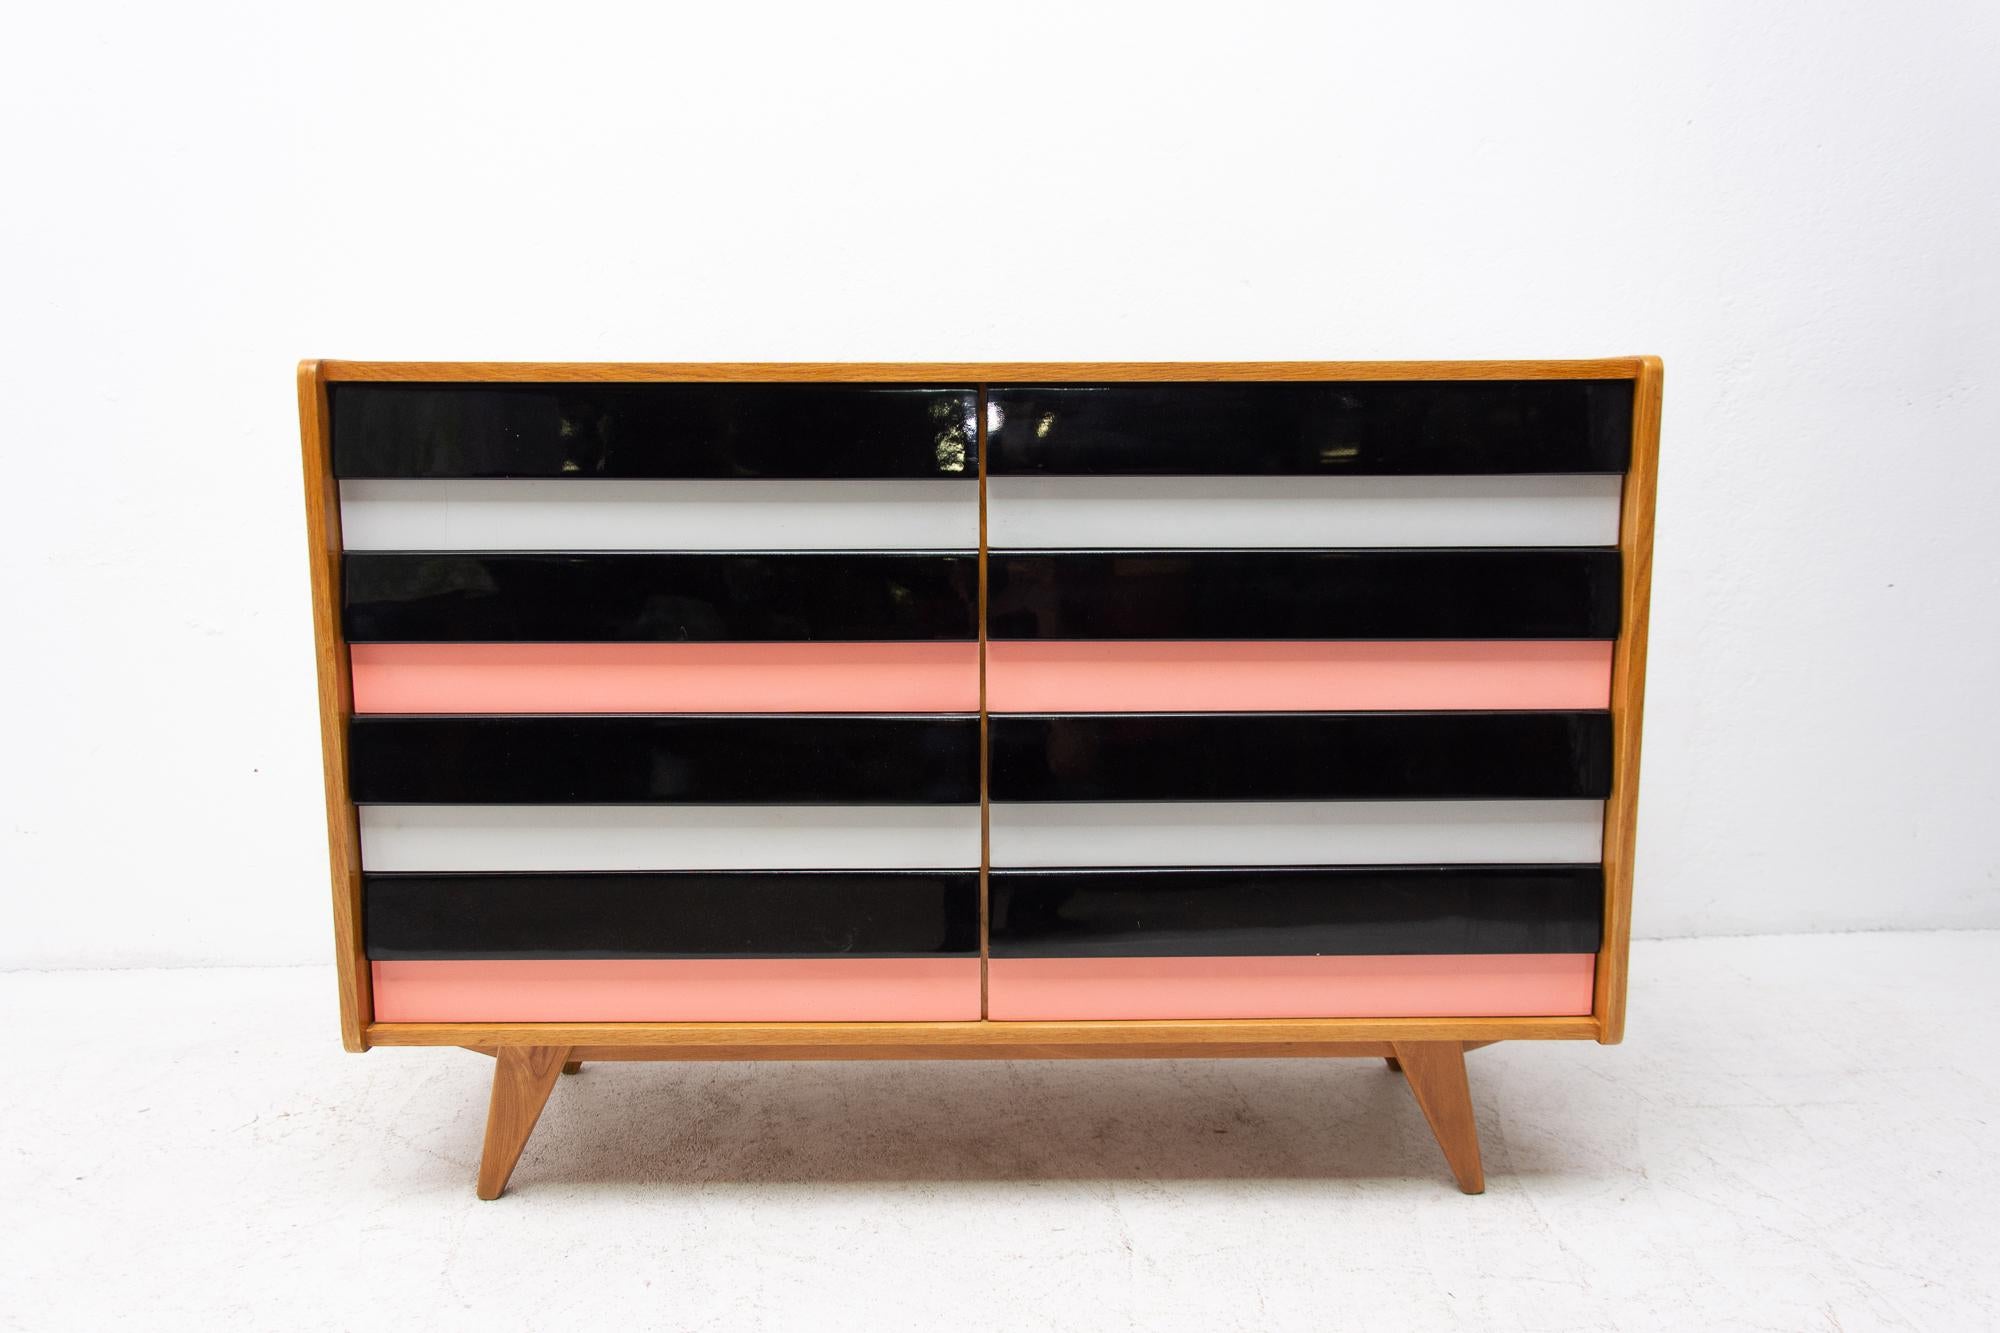 Modernist chest of drawers, model no. U-453, designed by Jirí Jiroutek for Interiér Praha. It was made in the former Czechoslovakia in the 1960´s. This model is associated with the world-famous EXPO 58 in Brussels. It features beech wood, plywood,